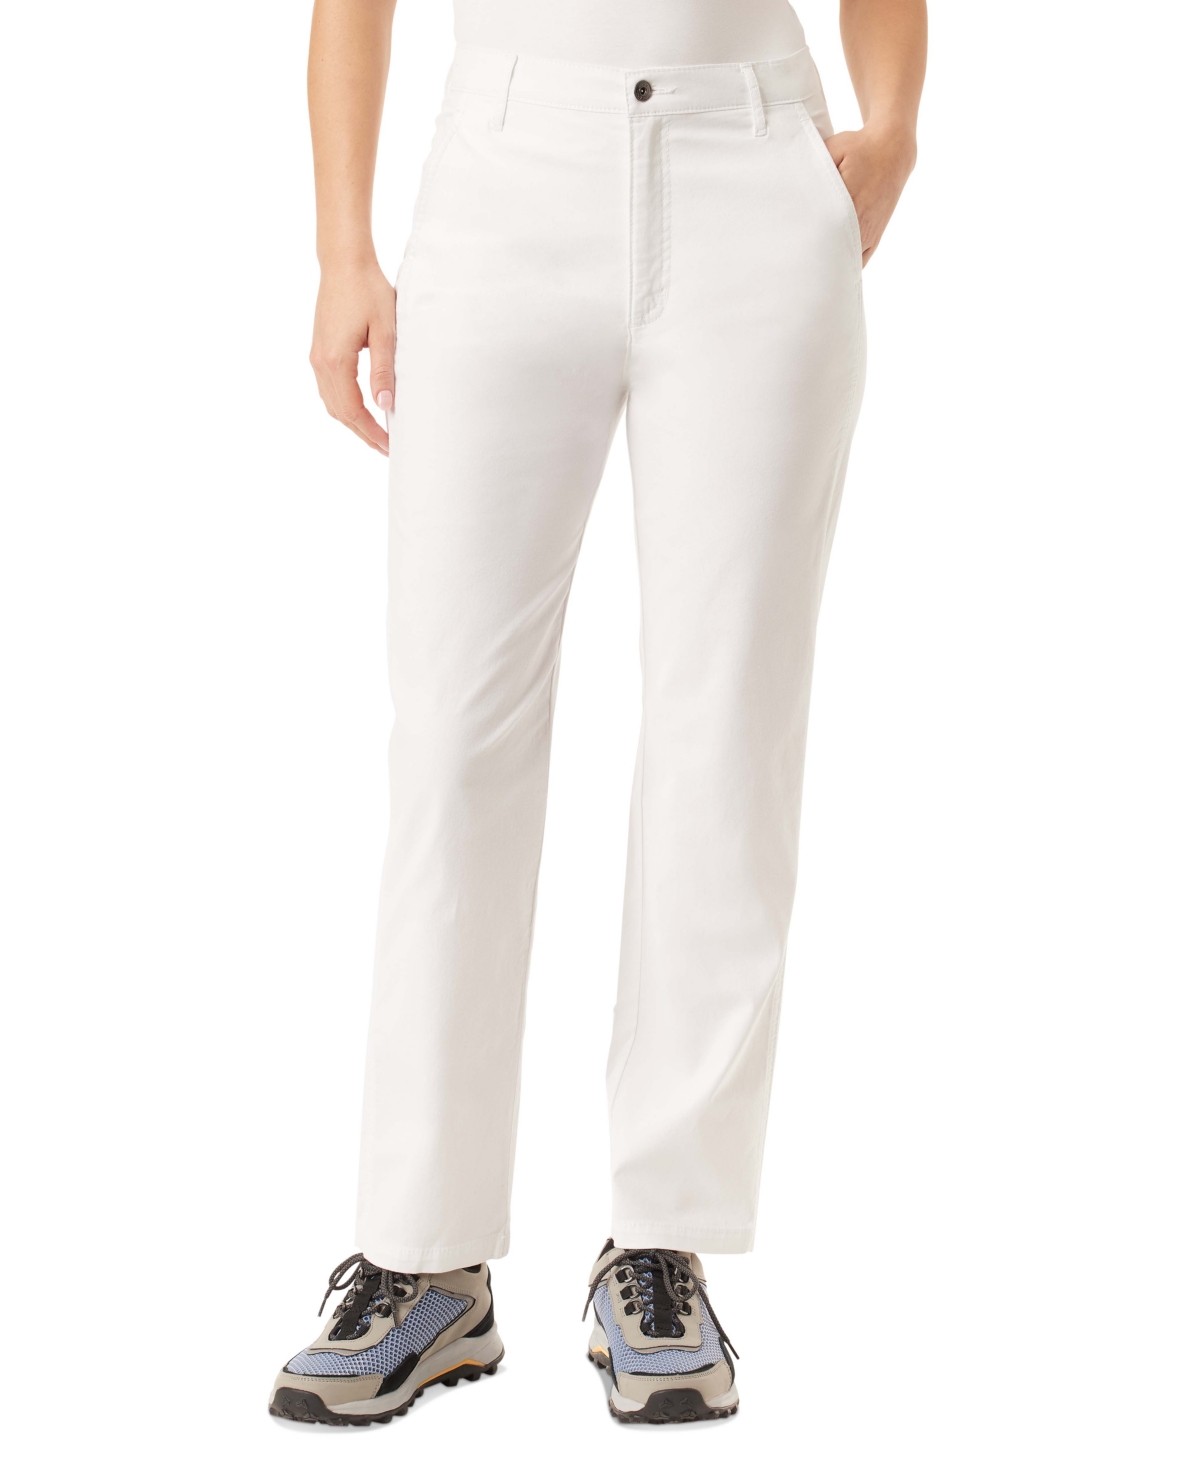 Women's Stretch-Canvas Anywhere Pants - BRIGHT WHITE